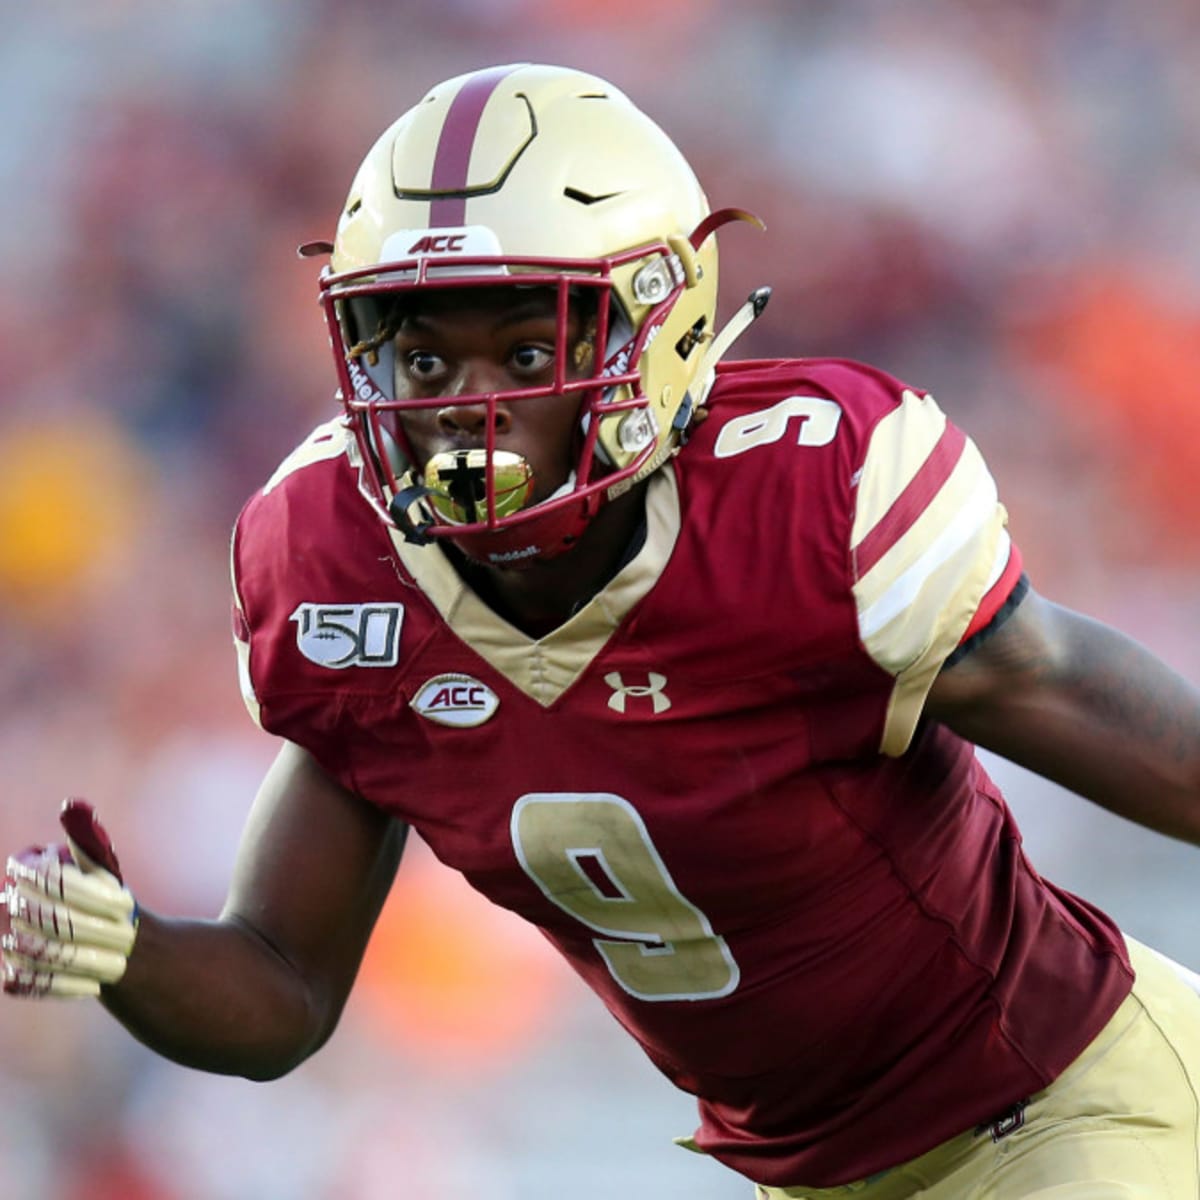 2022 NFL Draft: Inside Wide Receiver Prospect Rankings - Visit NFL Draft on  Sports Illustrated, the latest news coverage, with rankings for NFL Draft  prospects, College Football, Dynasty and Devy Fantasy Football.